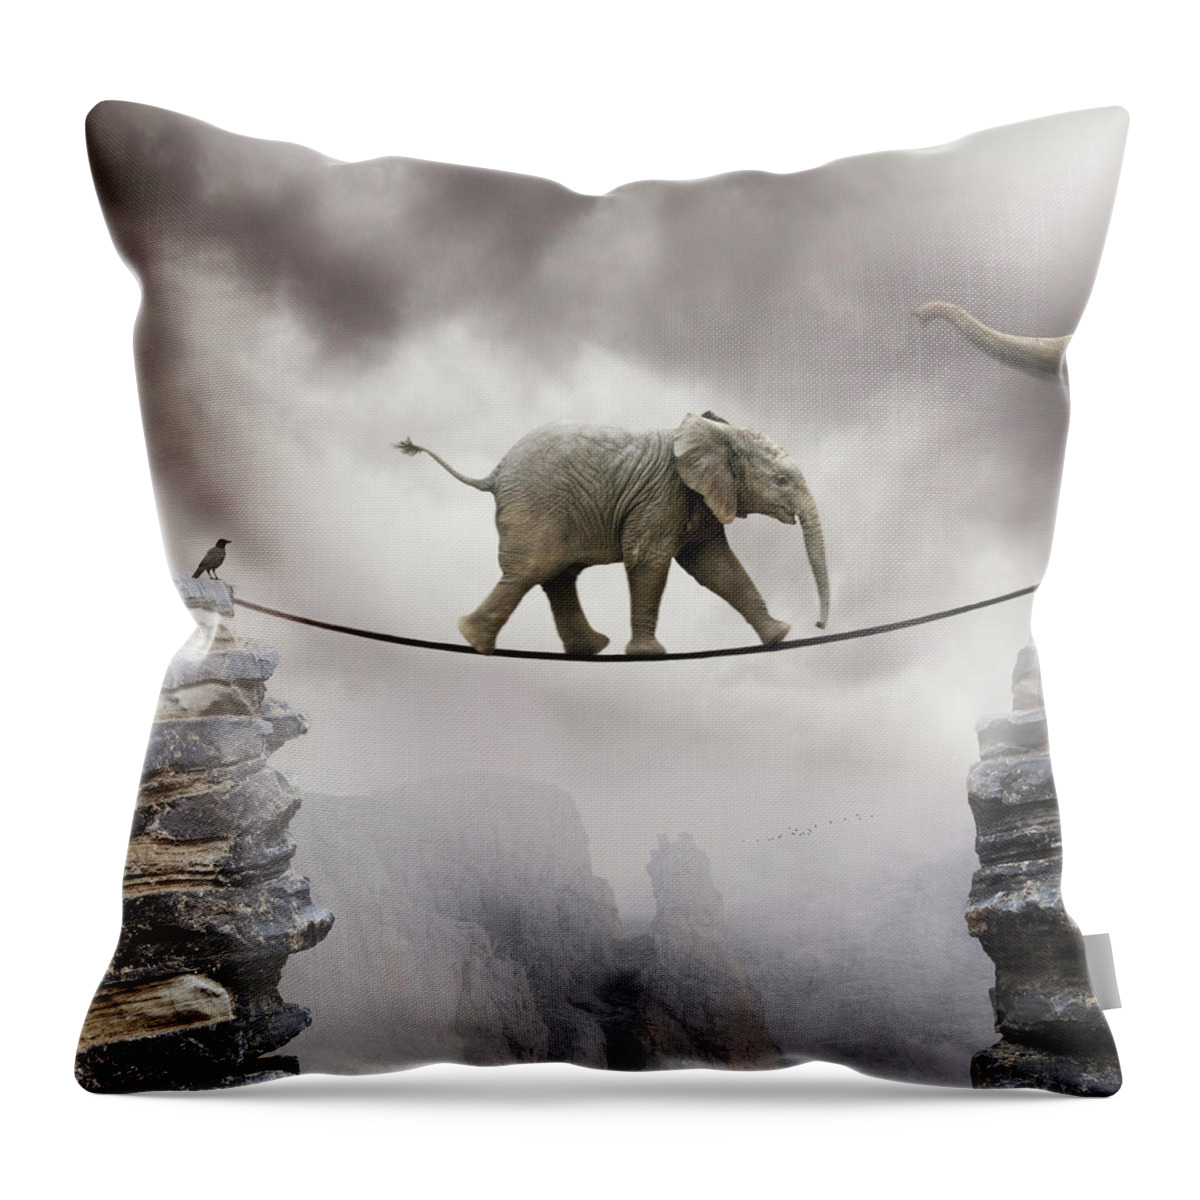 Animal Themes Throw Pillow featuring the photograph Baby Elephant by By Sigi Kolbe